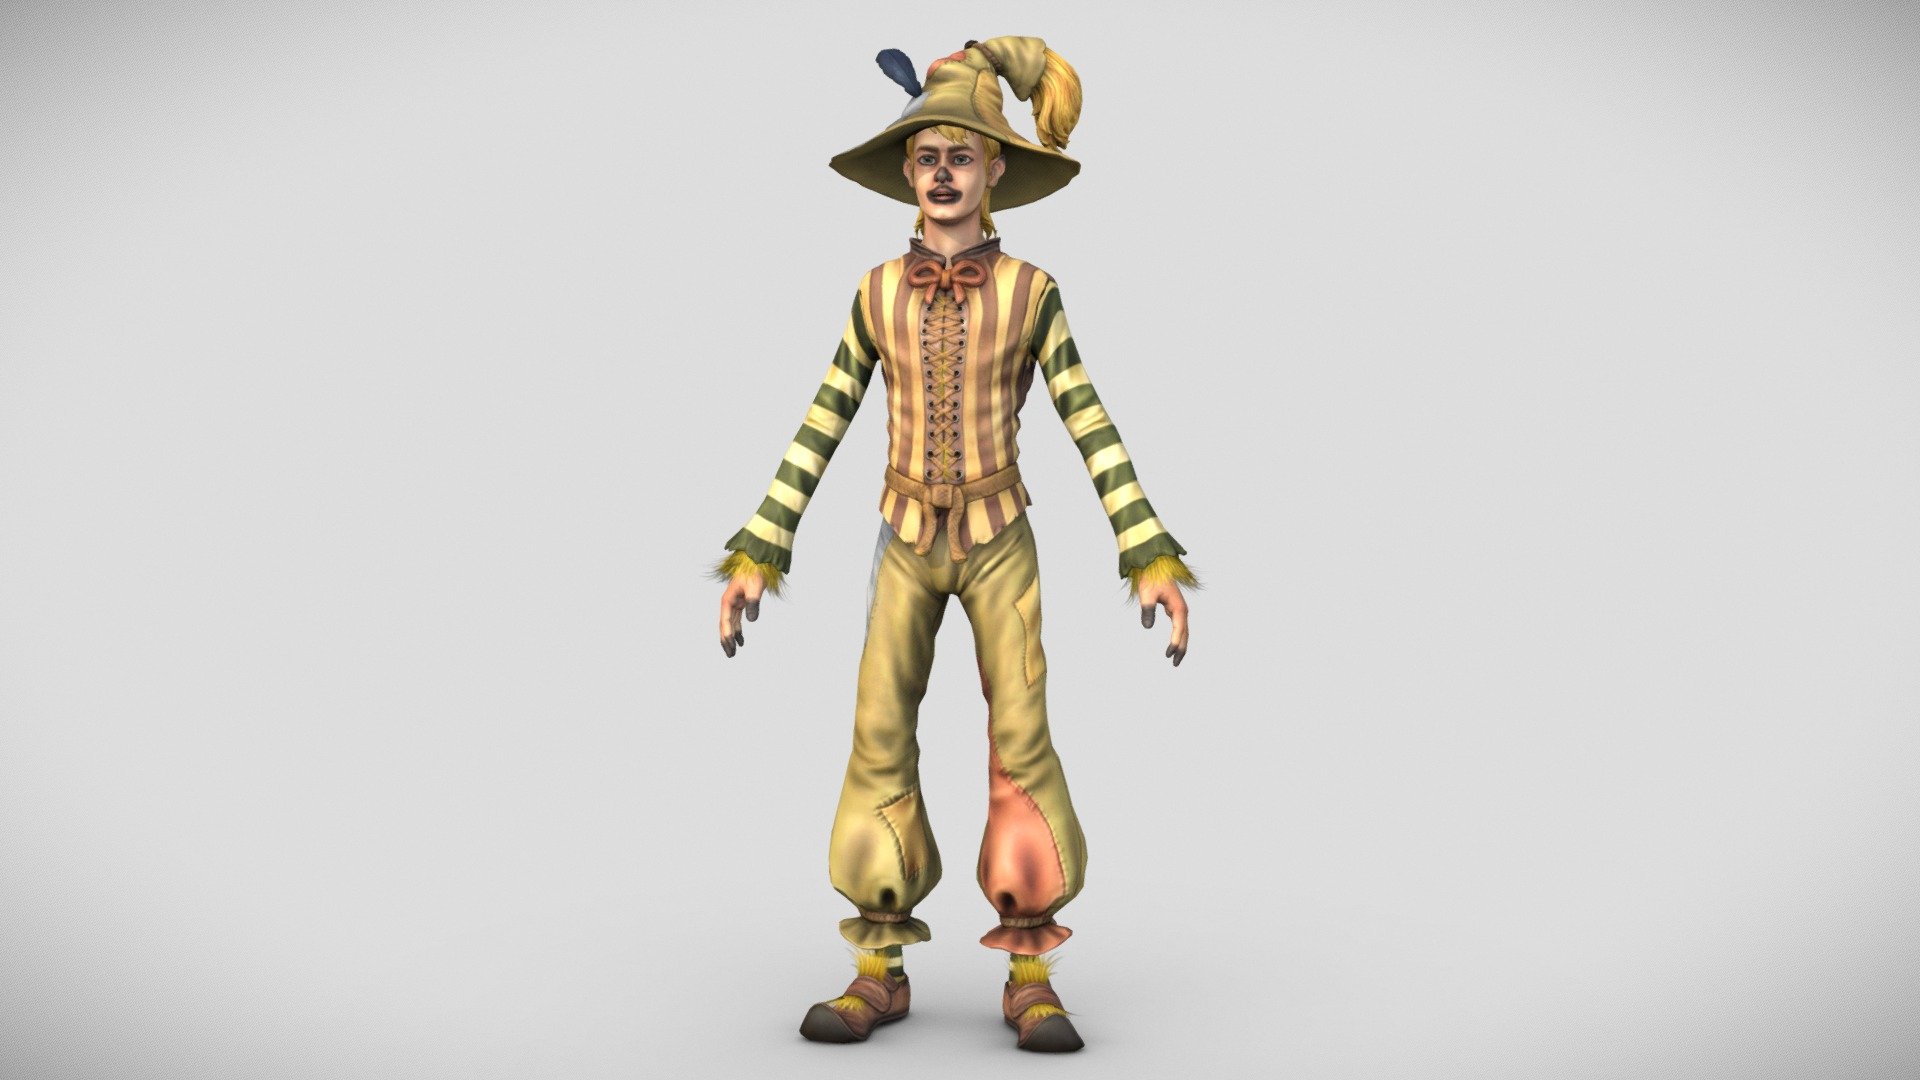 A scarecrow-themed wizard character model with textures.

Color, Specular/Gloss, Normal, Occlusion, and Cavity maps are 4096.

Alpha maps included for eyelashes and straw.

Collada, FBX, and OBJ formats included 3d model